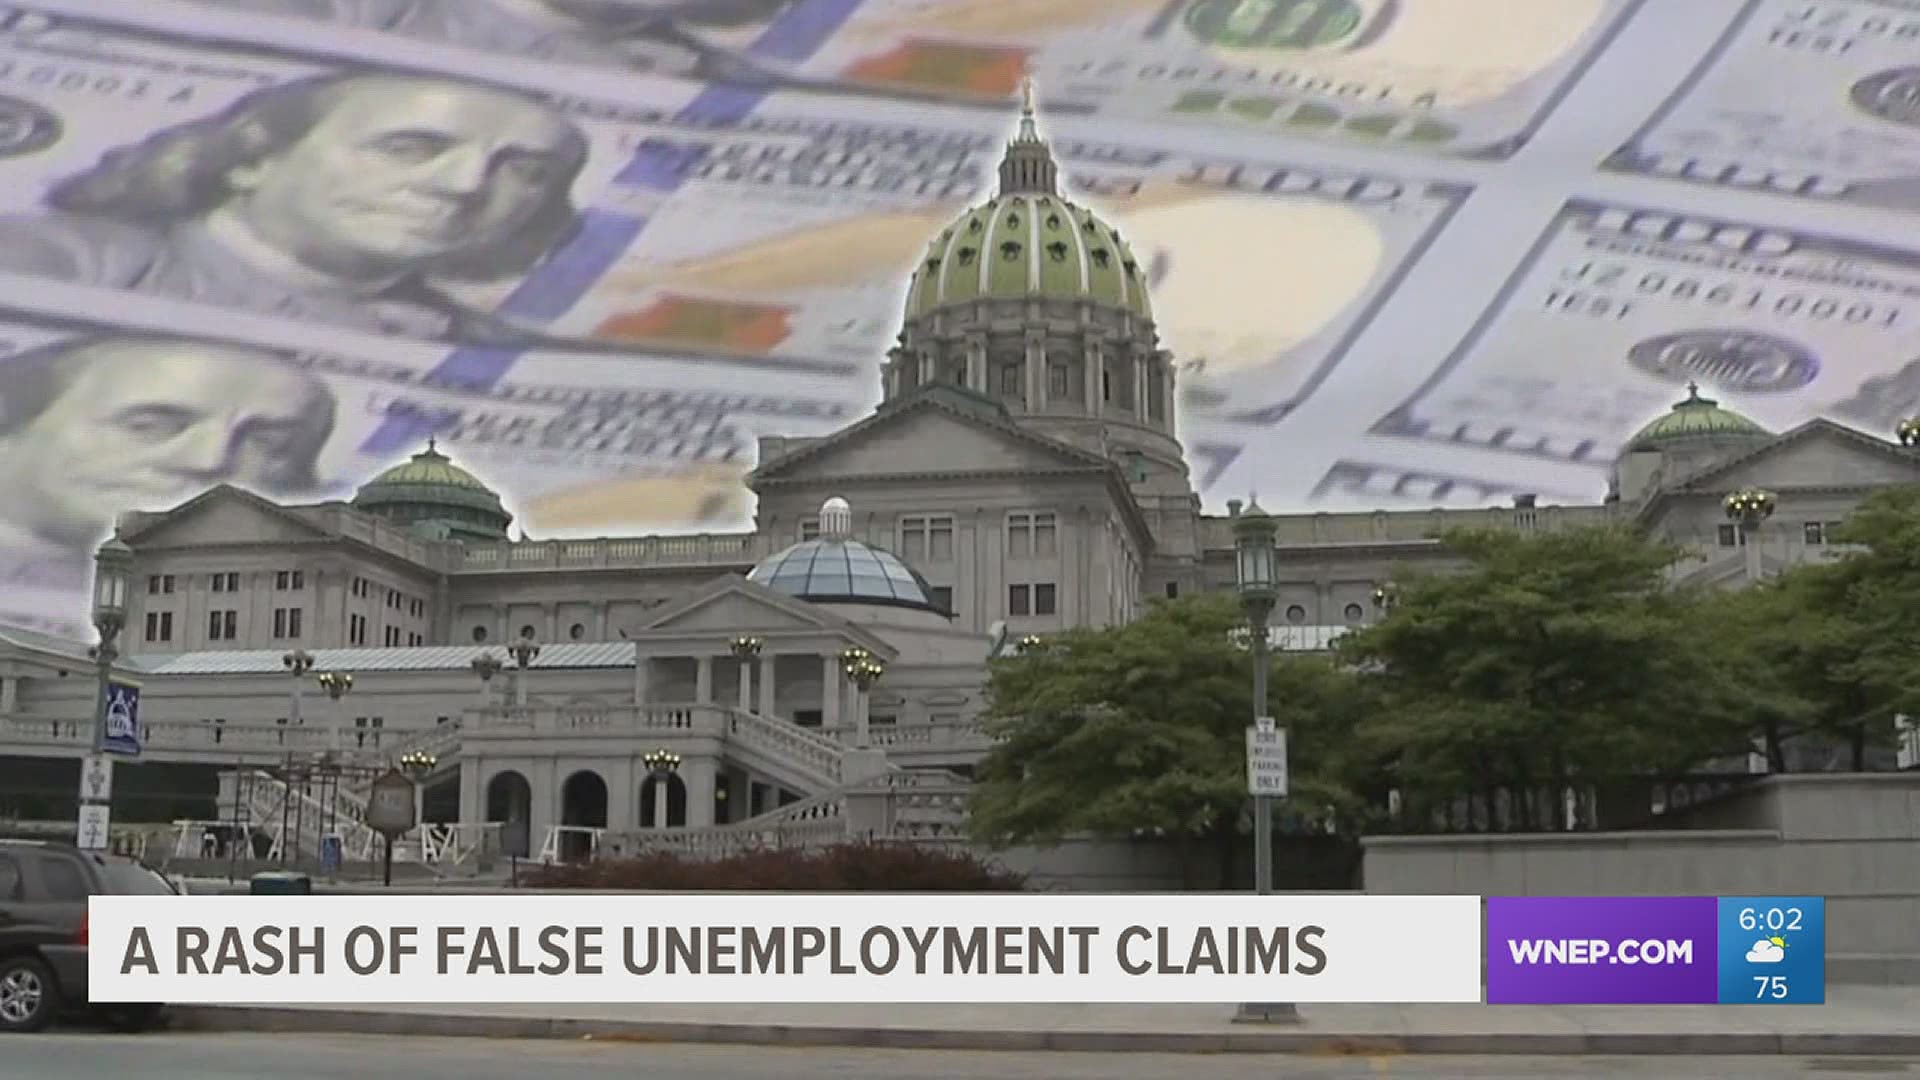 There's been a dramatic increase in fraudulent unemployment claims in the last few months. It's costing both individuals and businesses time, money, and hassle.